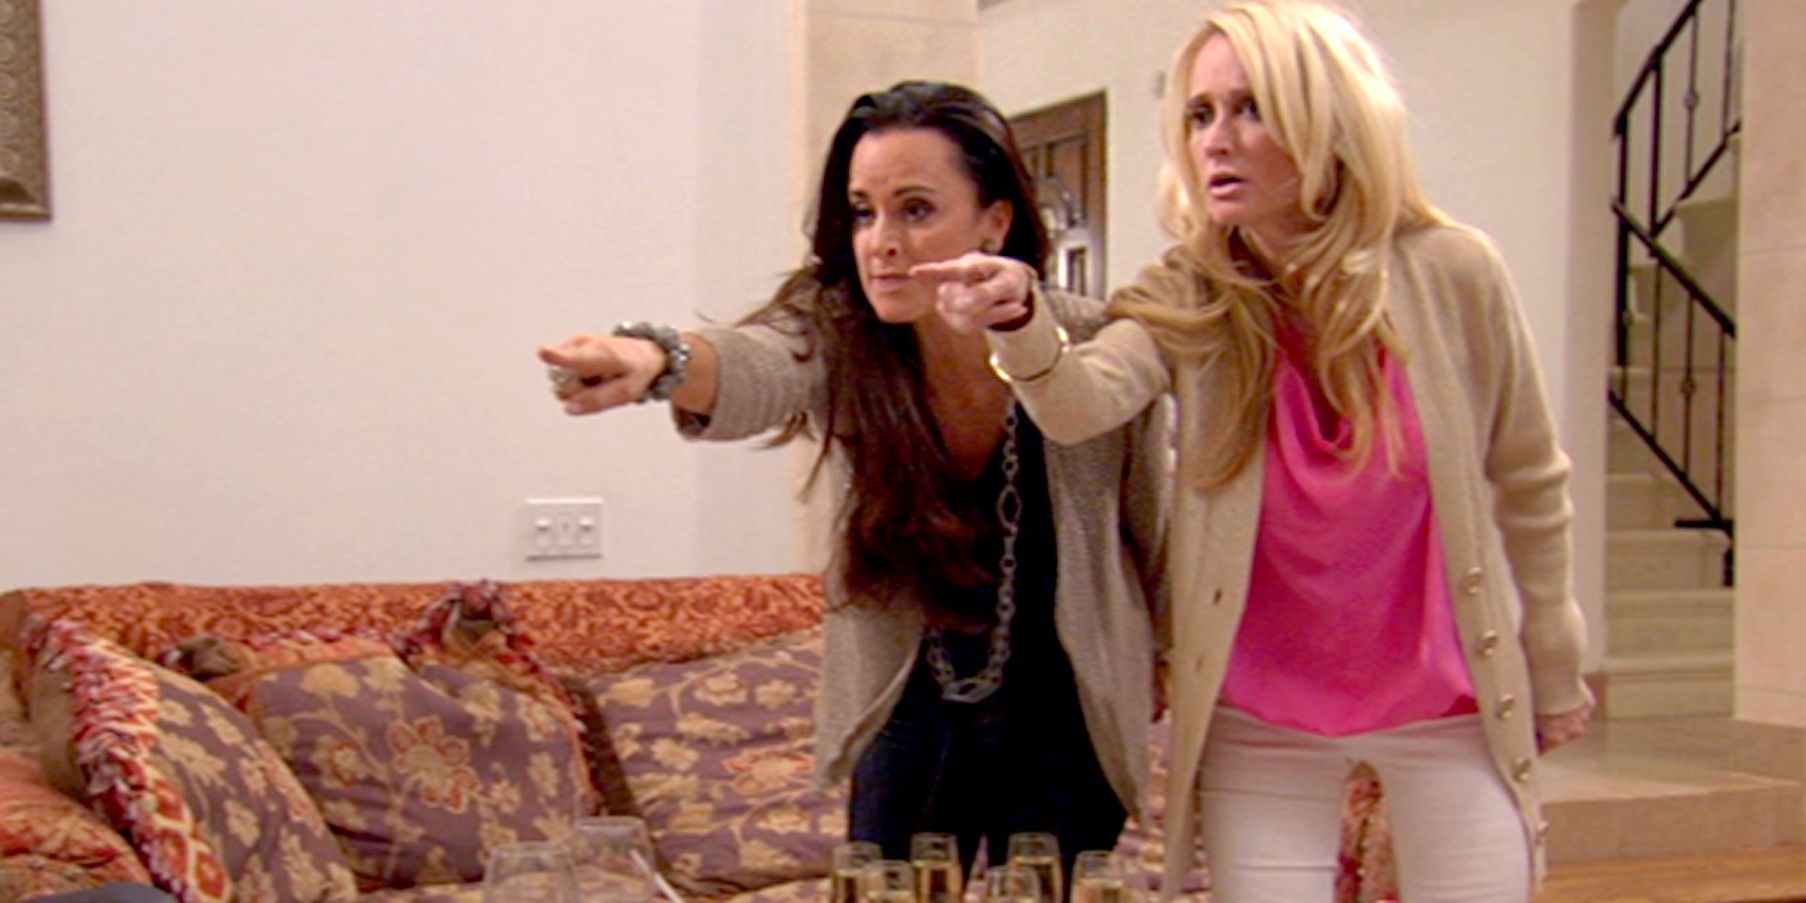 Kim and Kyle pointing at Brandi in an episode of RHOBH